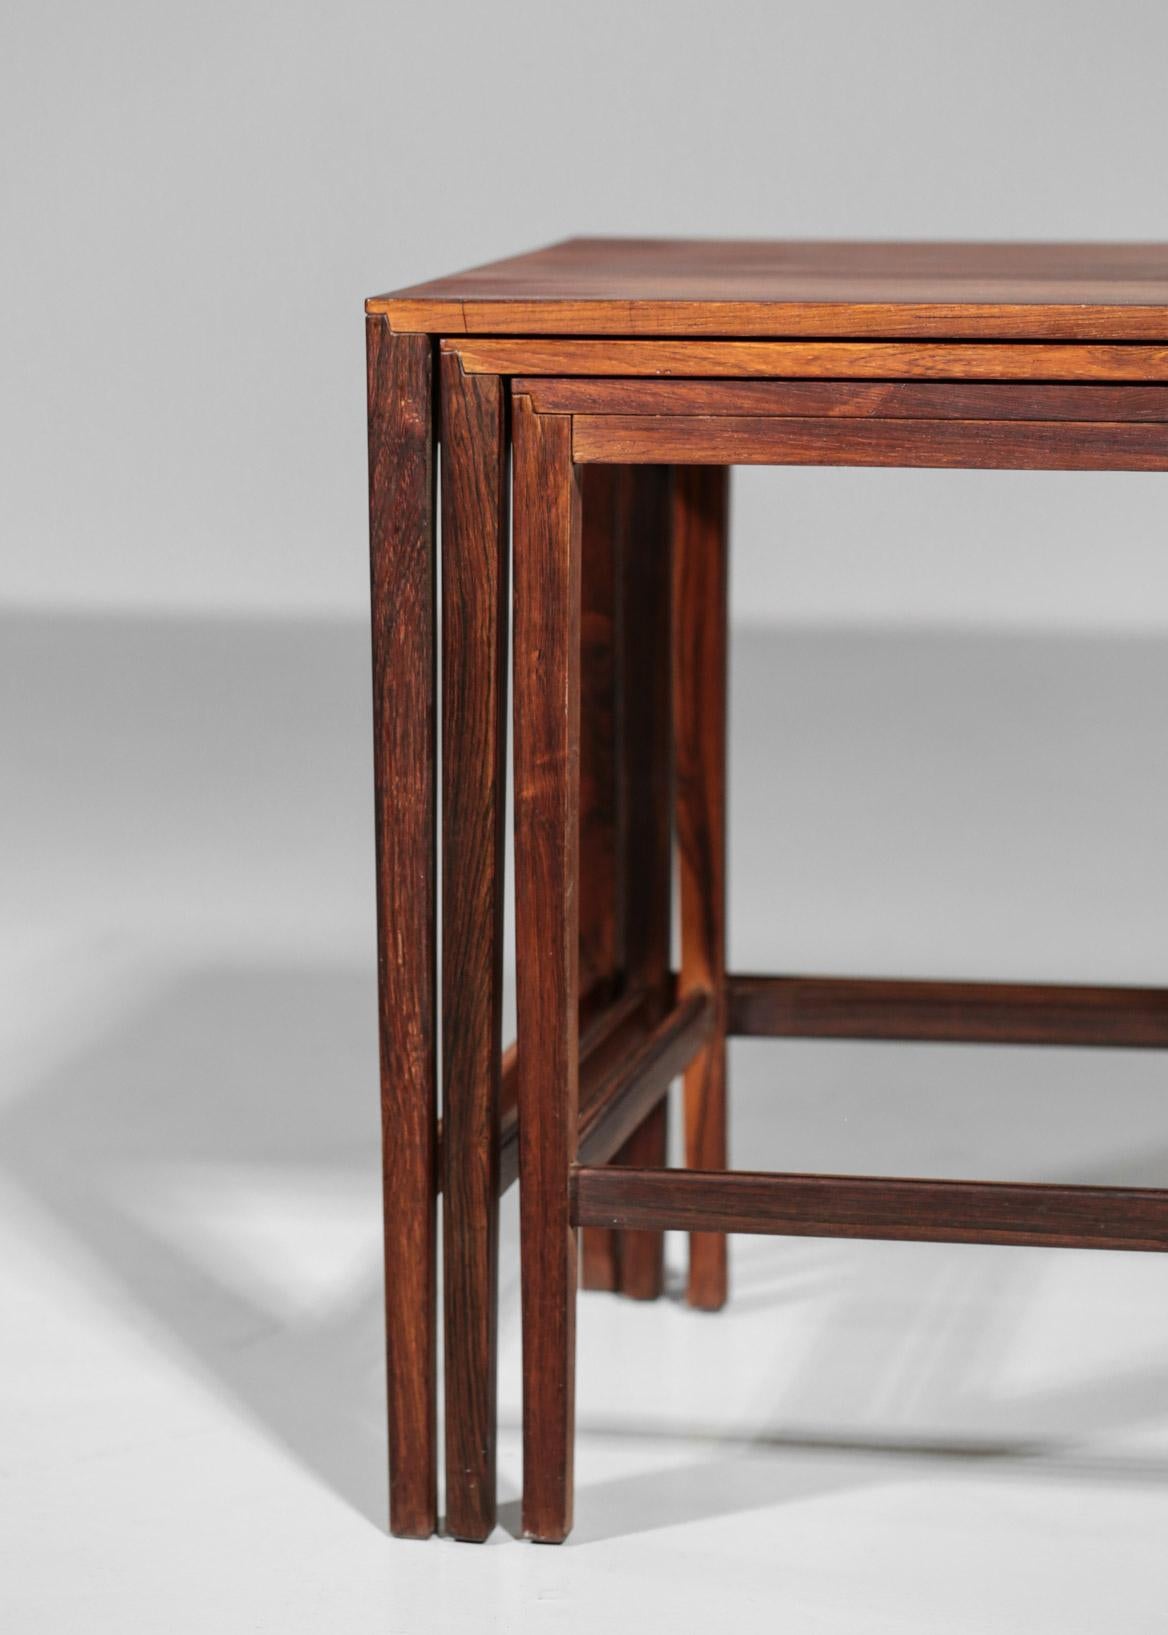 Scandinavian Nesting Tables in Rosewood 1960s Danish In Excellent Condition For Sale In Ternay, Auvergne-Rhône-Alpes